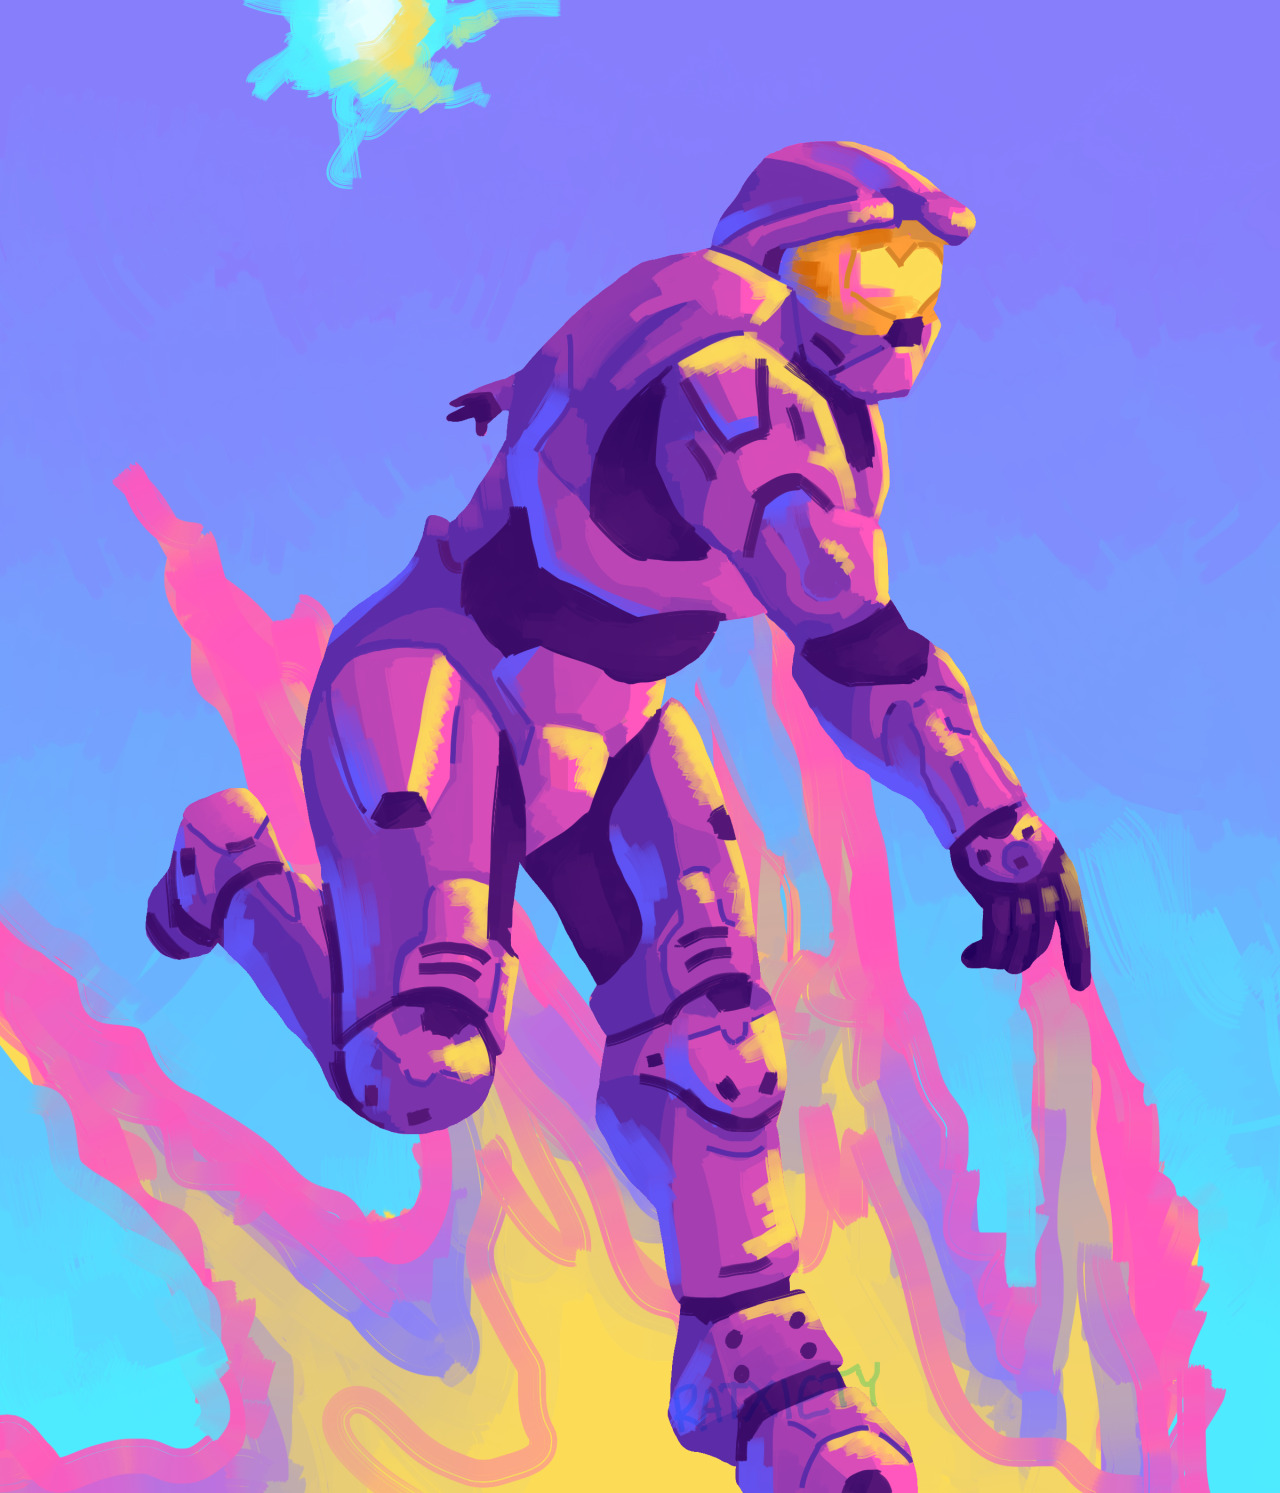 A brightly colored digital painting of Donut from the popular web series Red vs Blue. He is throwing a plasma grenade and has a heart on his visor. The color palette is pink, blue and yellow and there's a flame on the background.